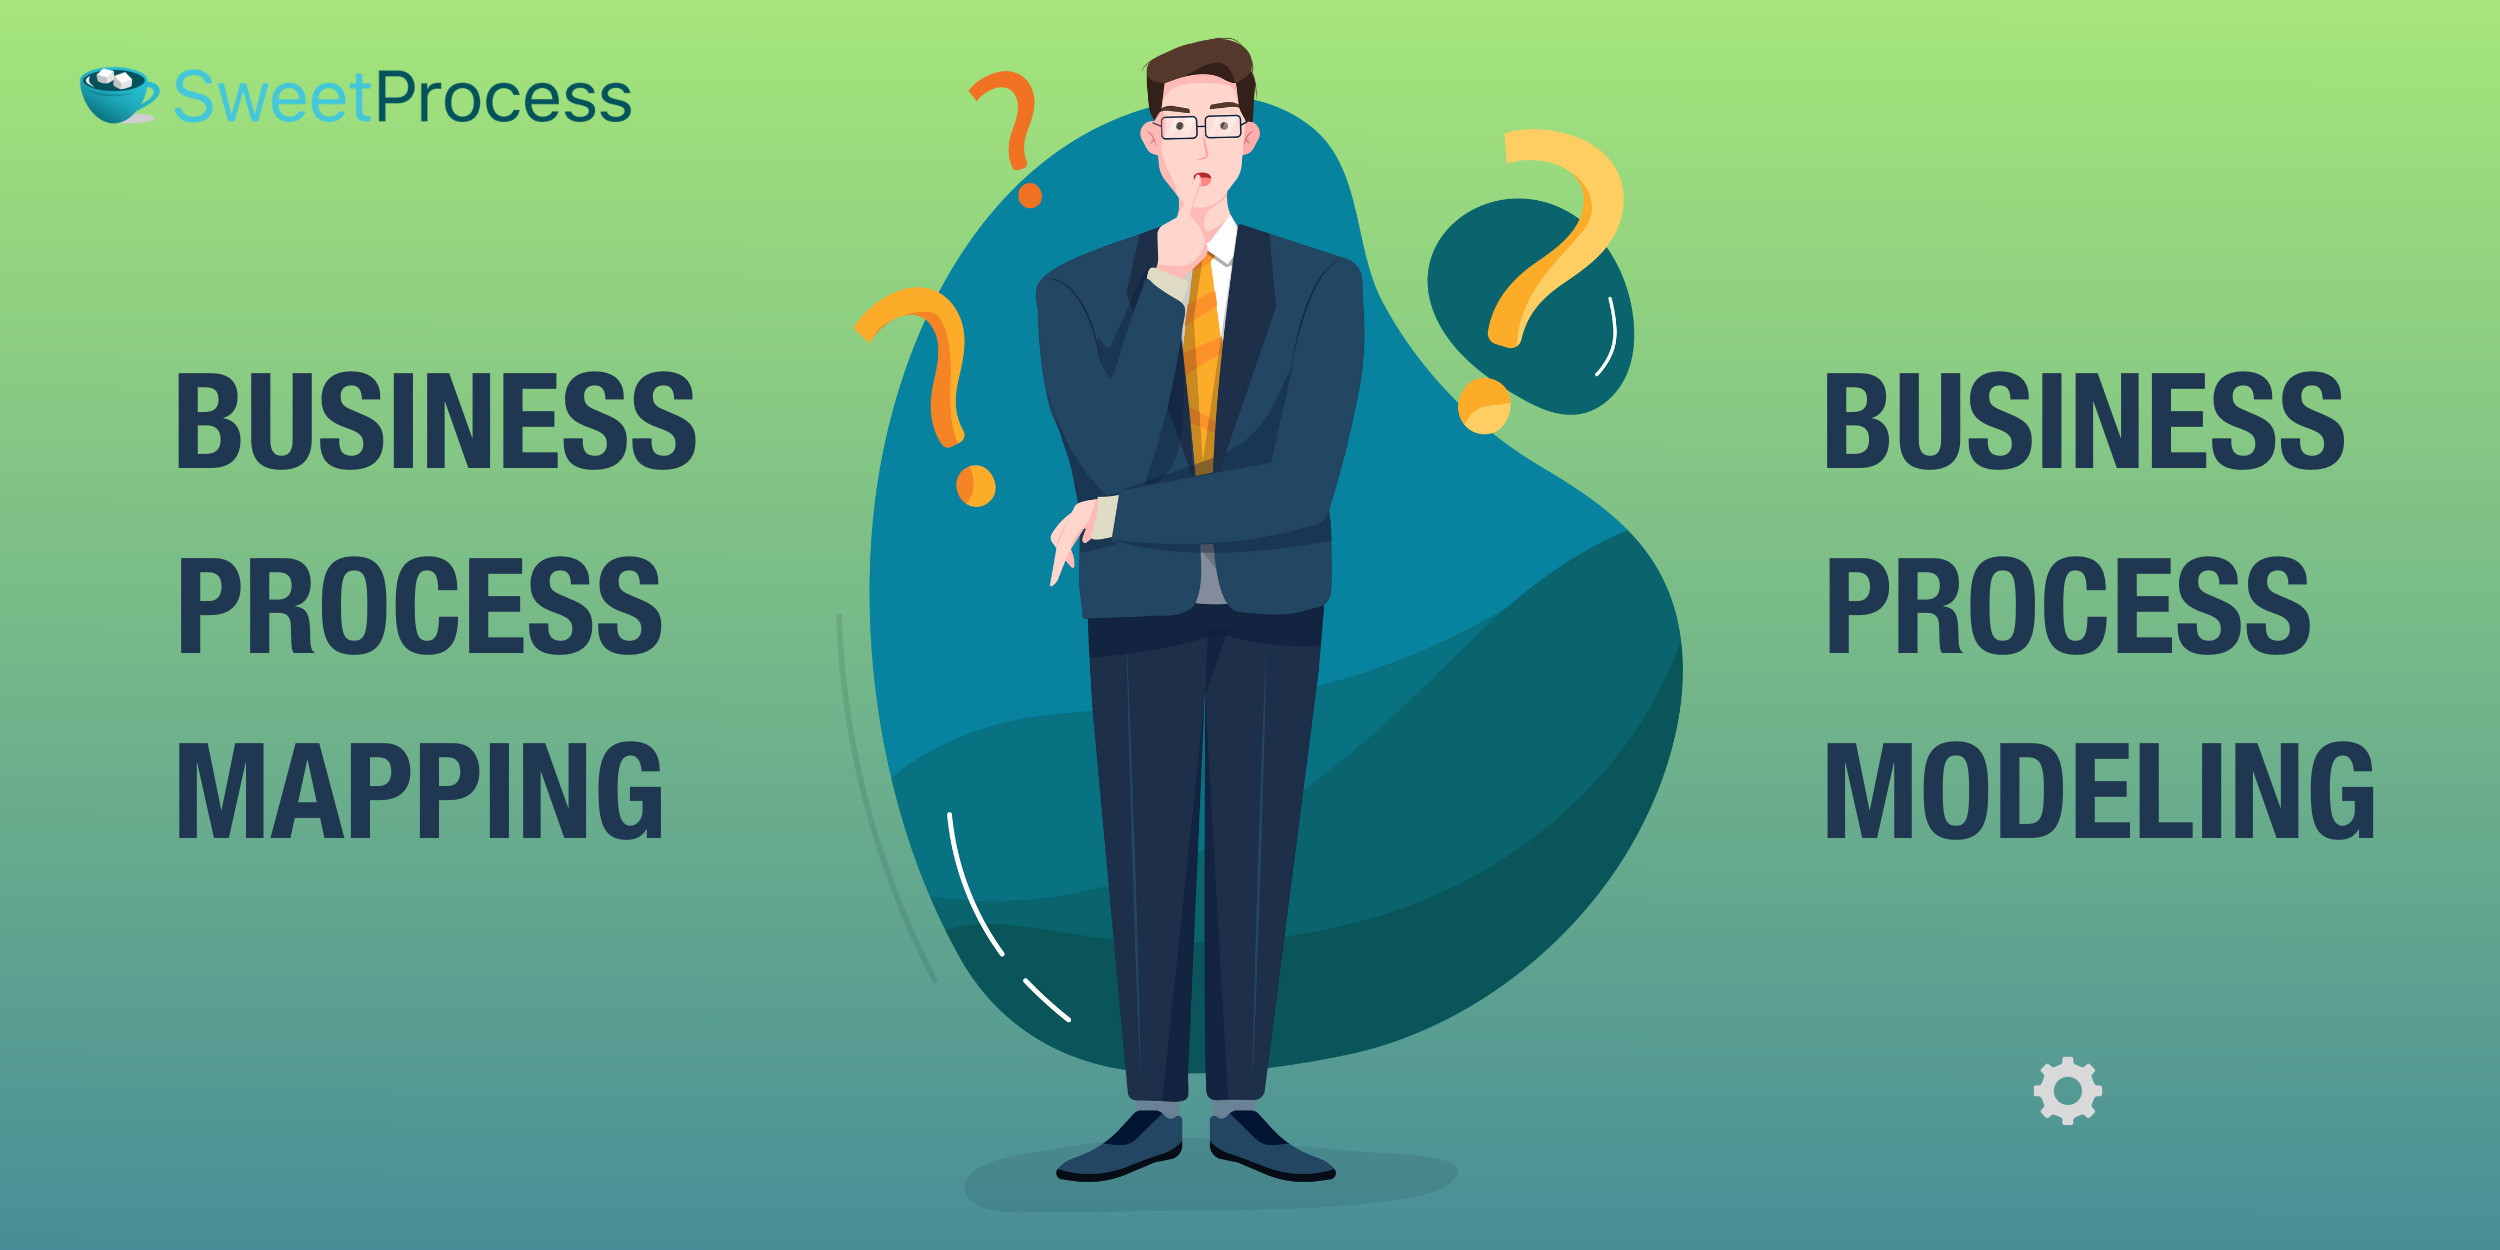 Differences Between Business Process Mapping and Business Process Modeling